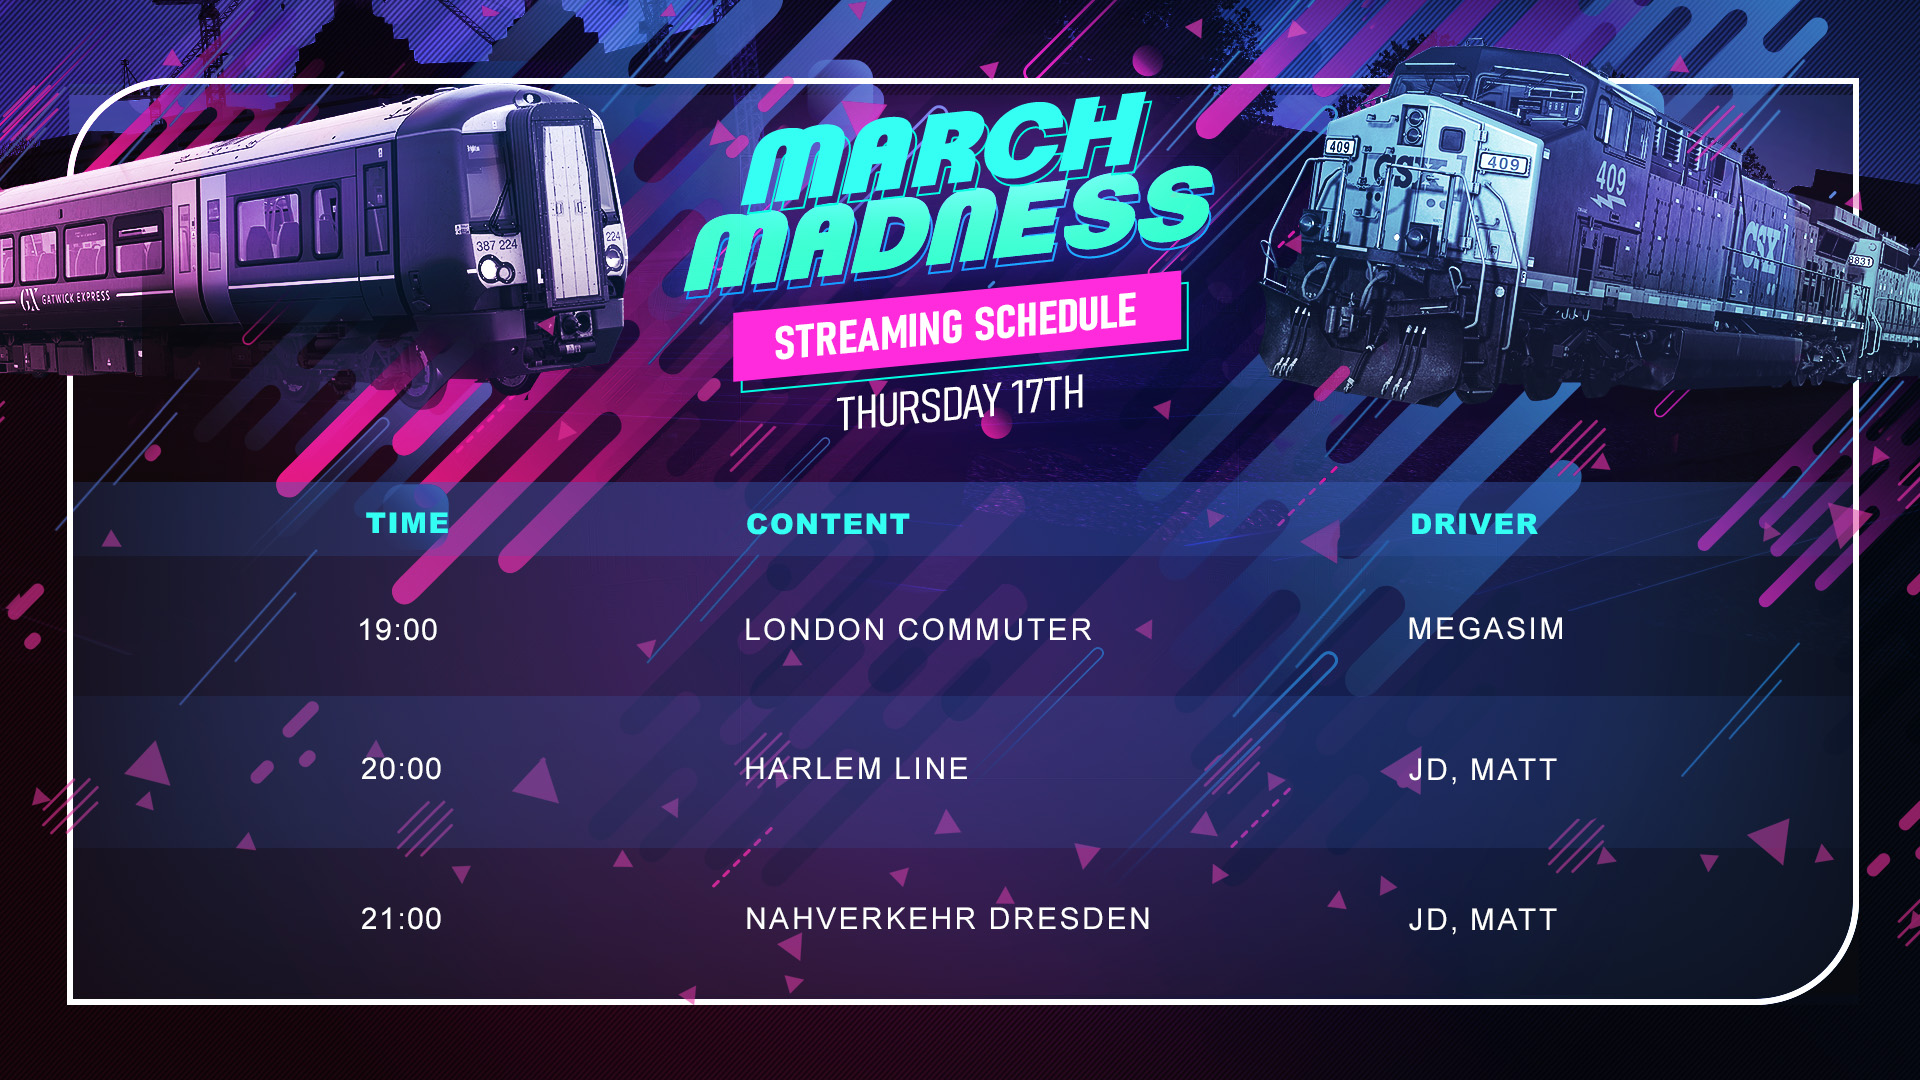 March_Madness_Streaming_schedule1.jpg